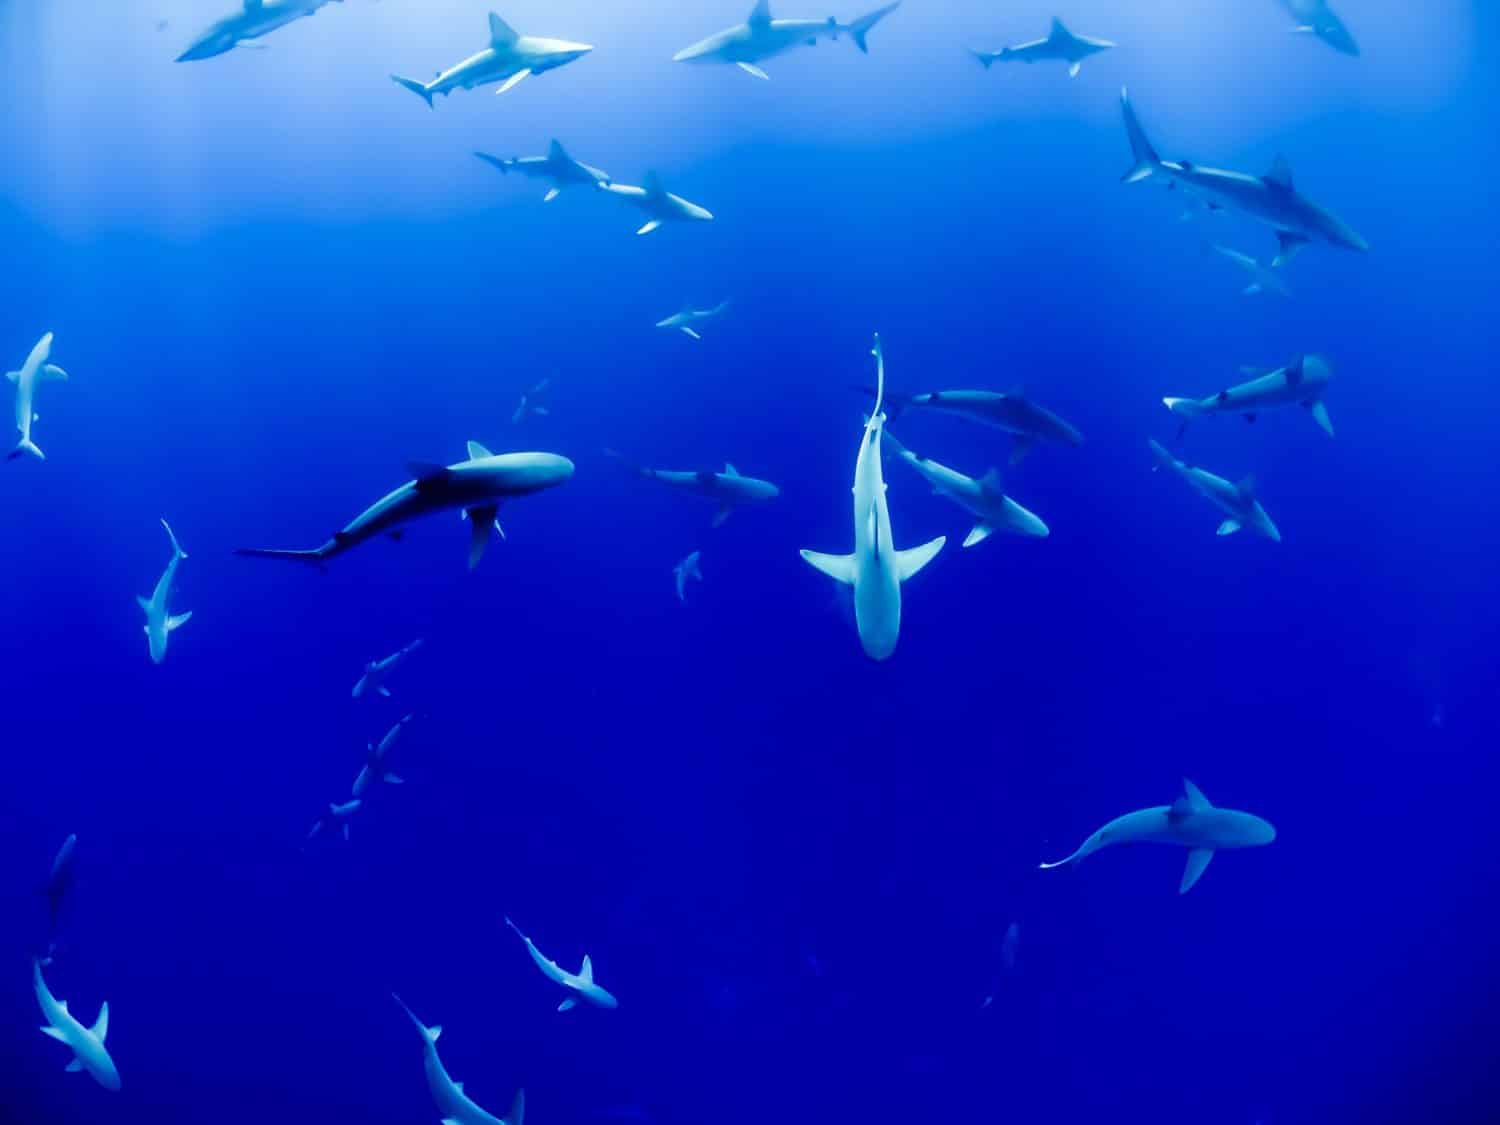 A group of sharks in deep blue water.